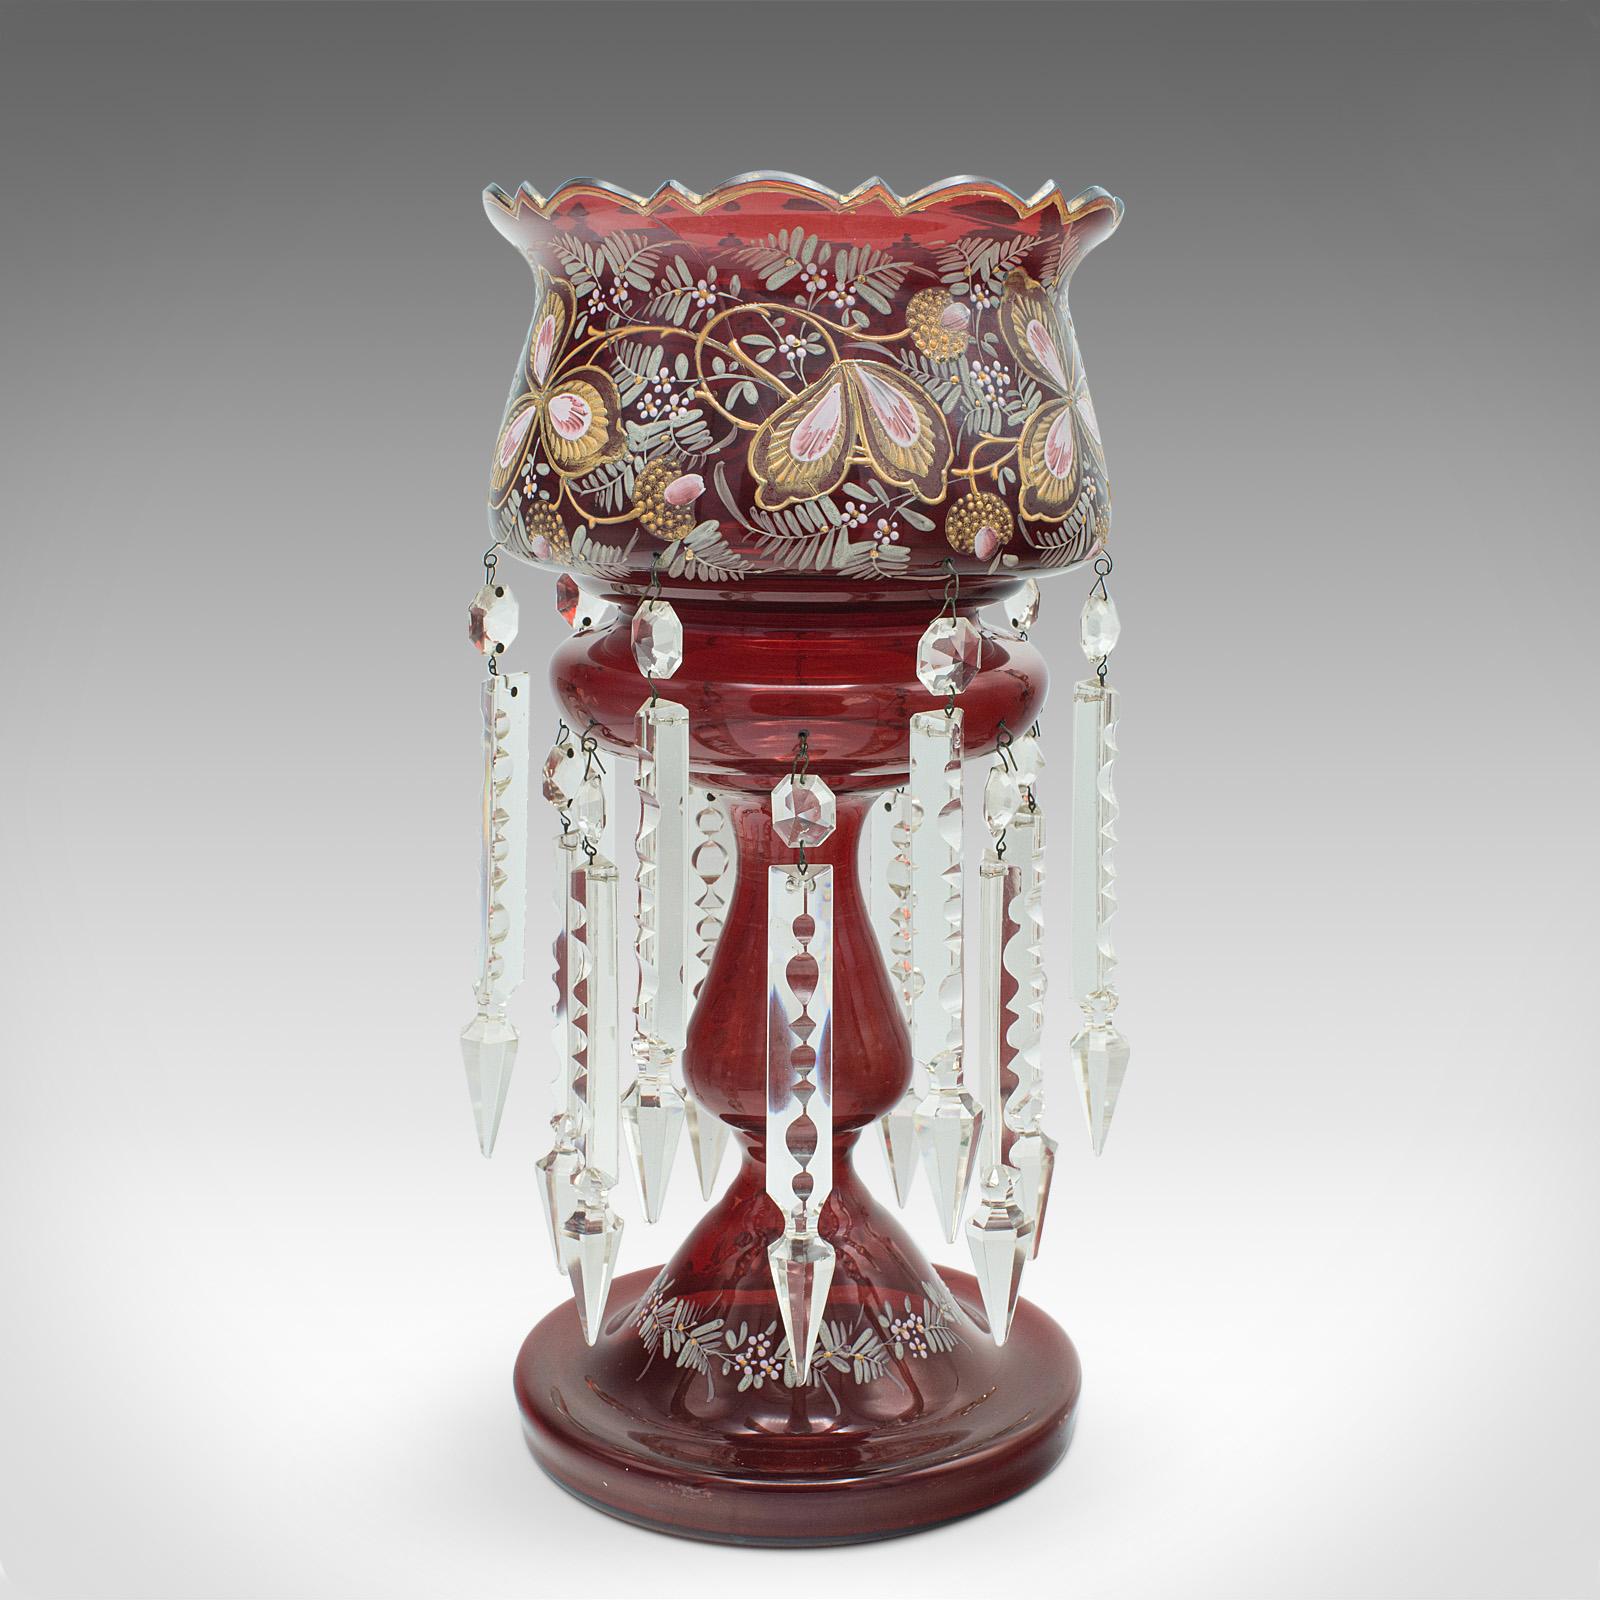 This is an antique cranberry lustre. An English, glass and crystal decorative candle lamp, dating to the late Victorian period, circa 1900.

Gorgeous colour depth and striking crystal lustre
Displays a desirable aged patina and in good order
Superb